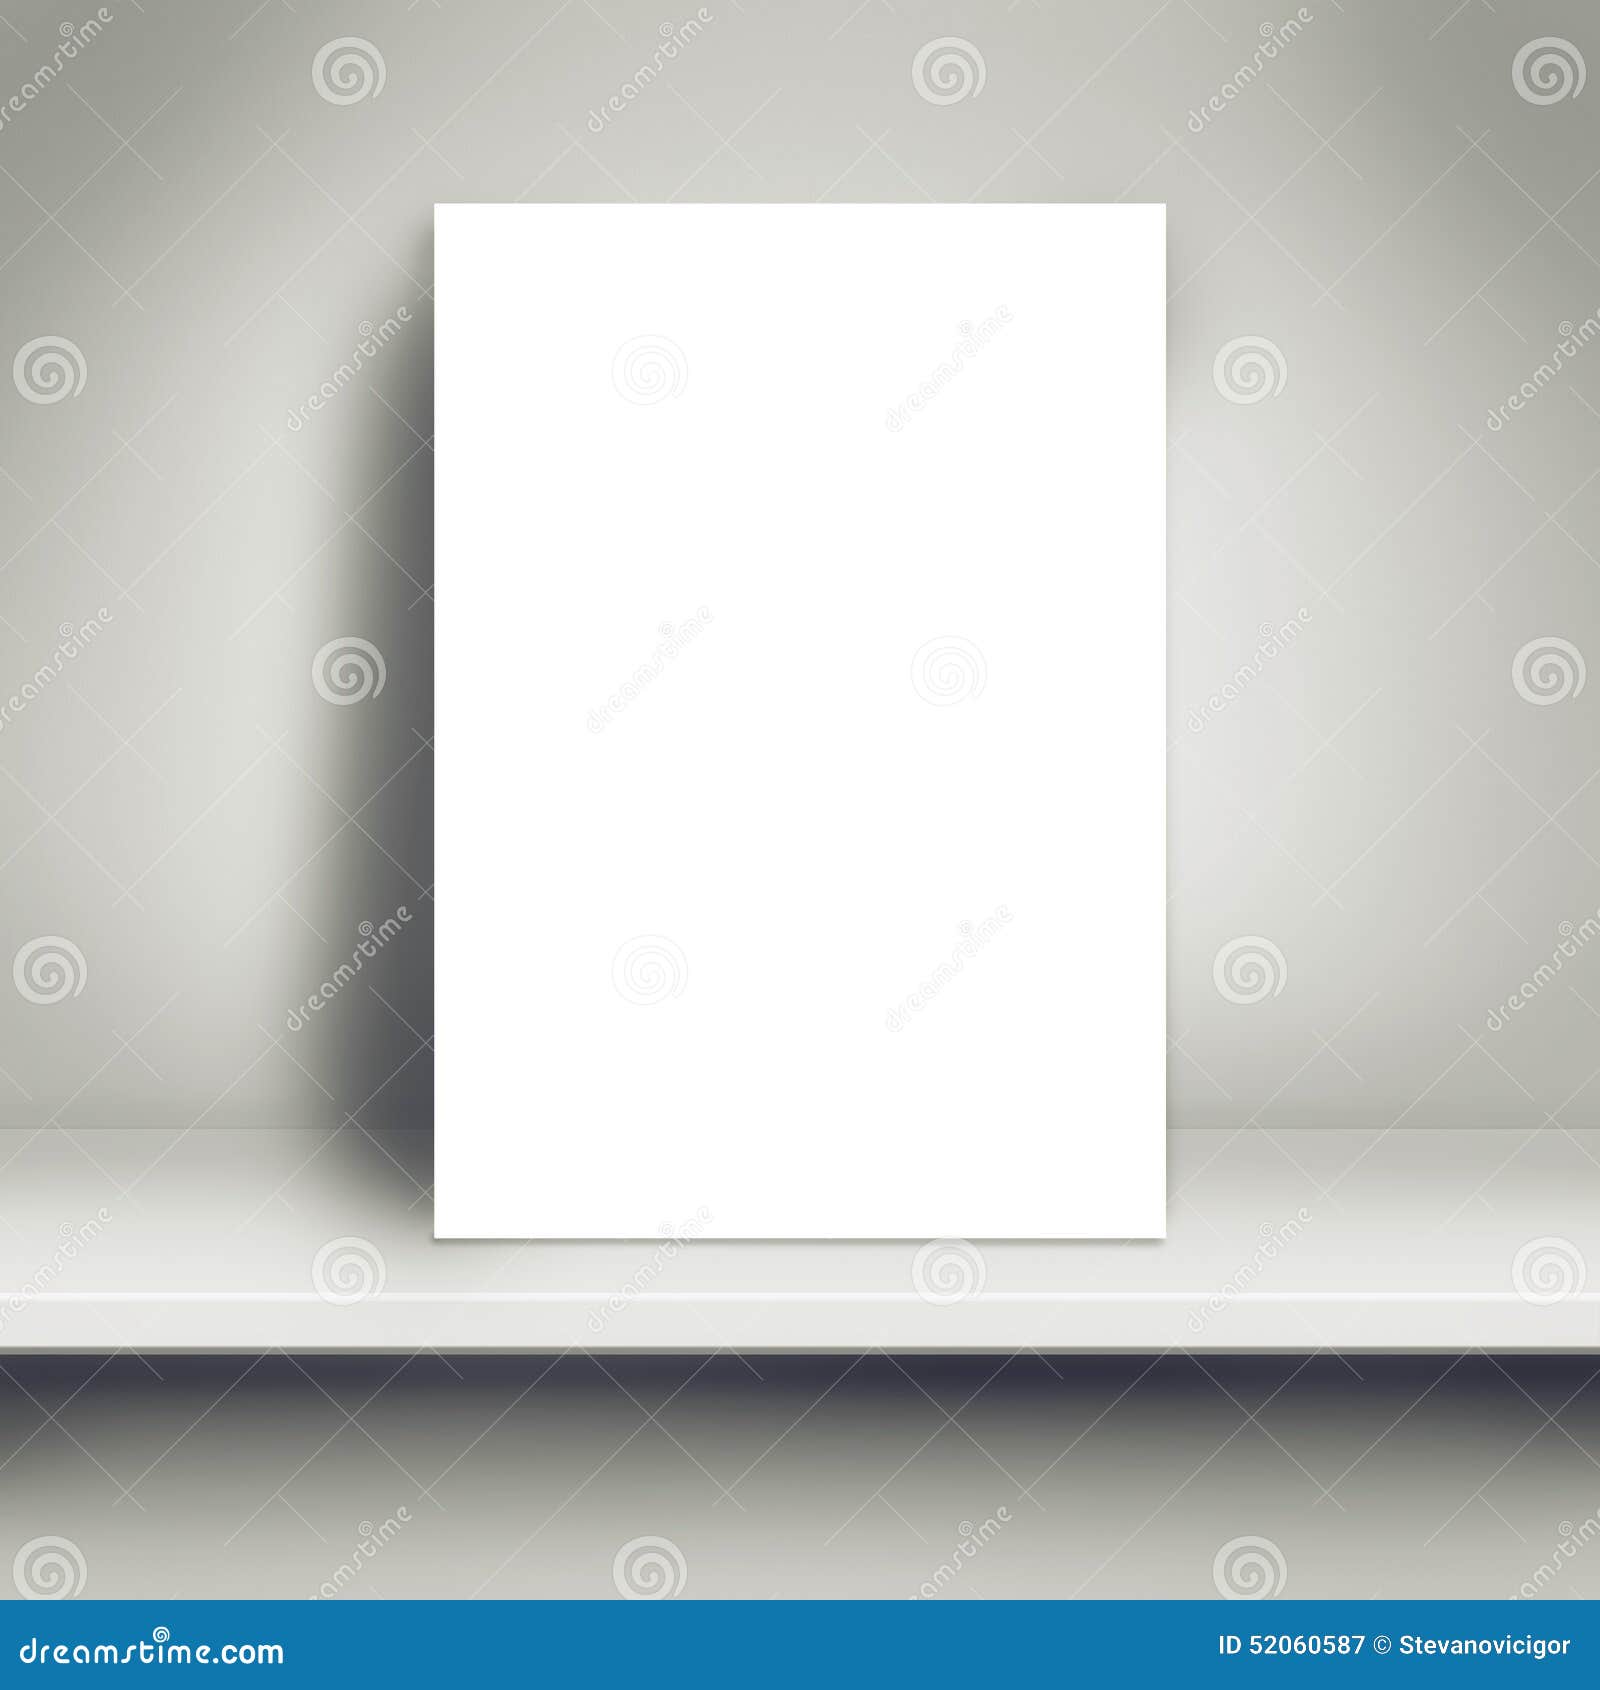 Poster Leaning on White Shelf in the Room as Copy Space for Design 